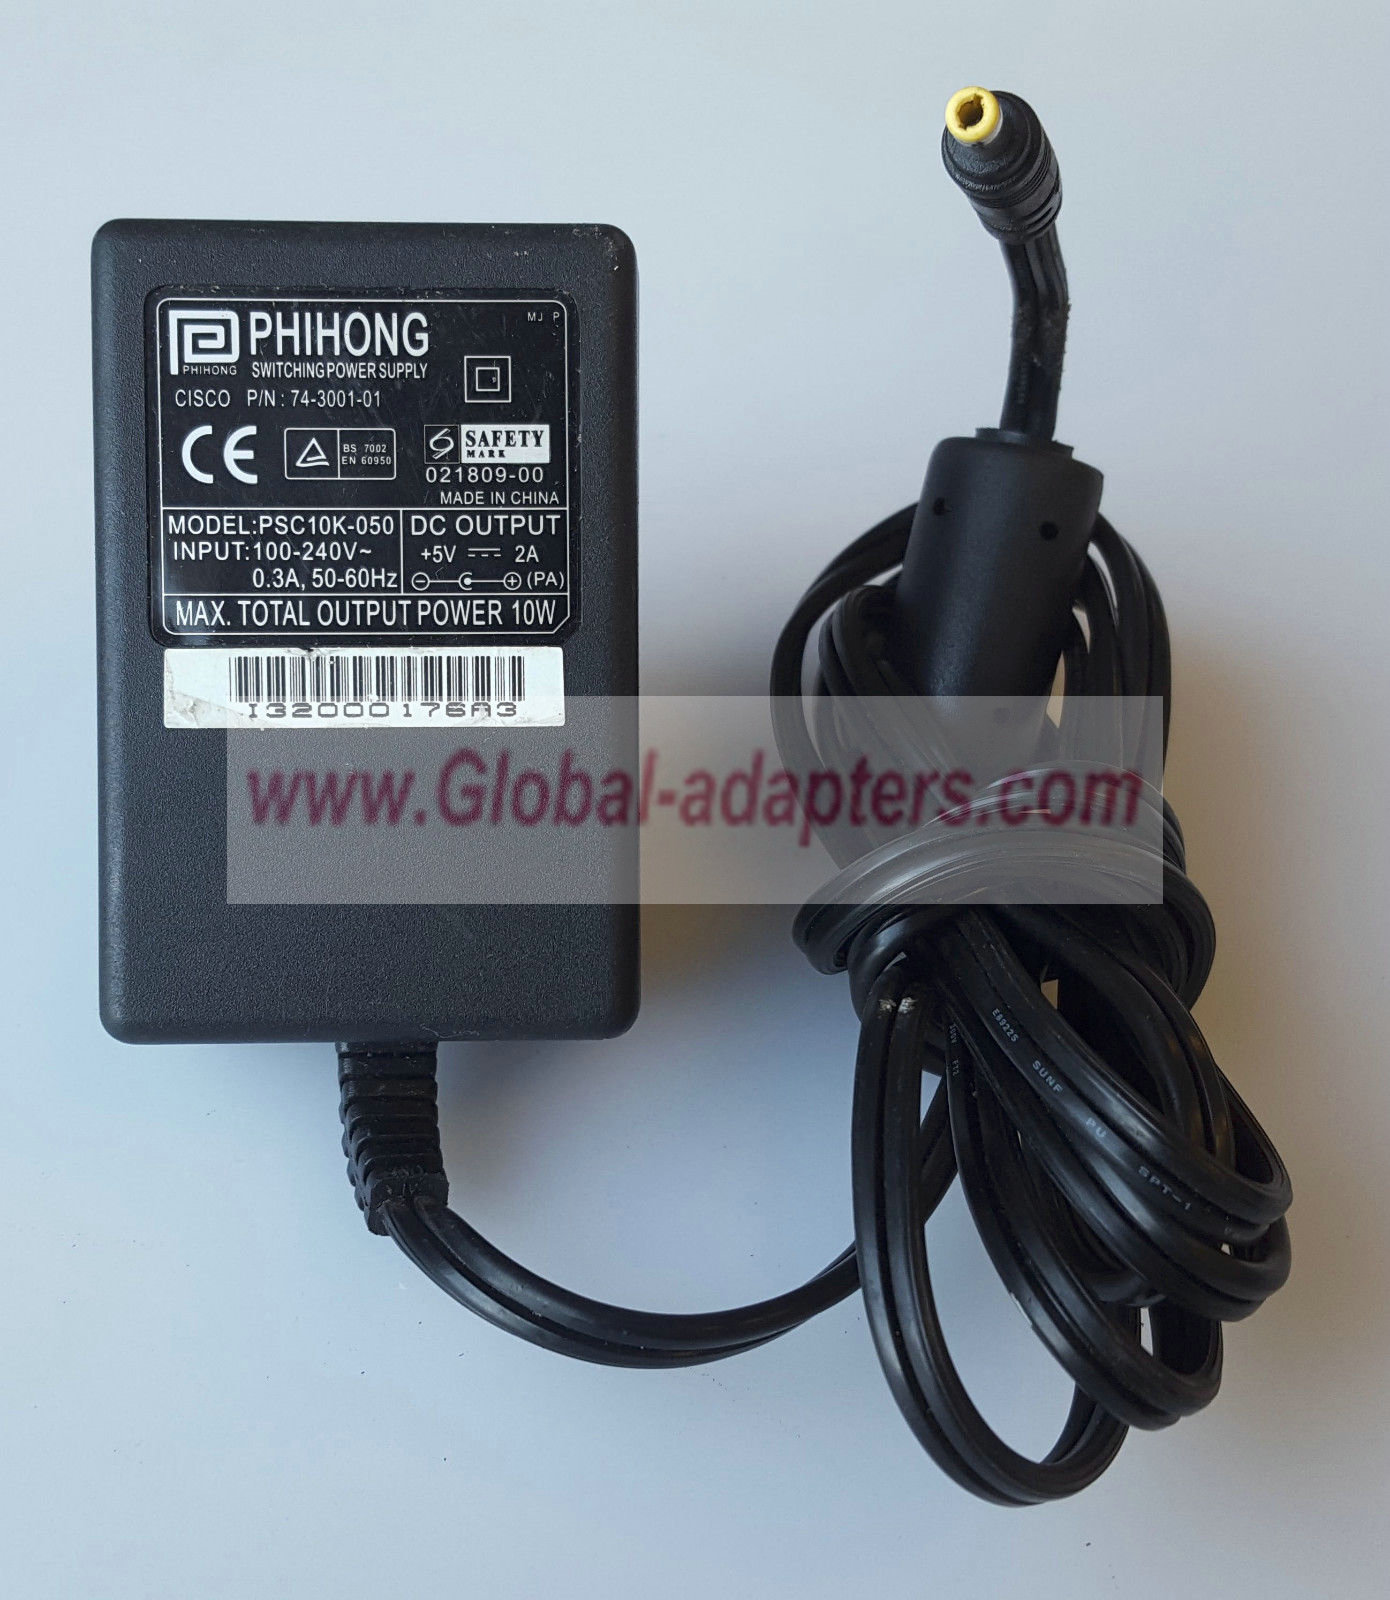 NEW 5V 2A PHIHONG PSC10K-050 74-3001-01 AC/DC POWER SUPPLY ADAPTER